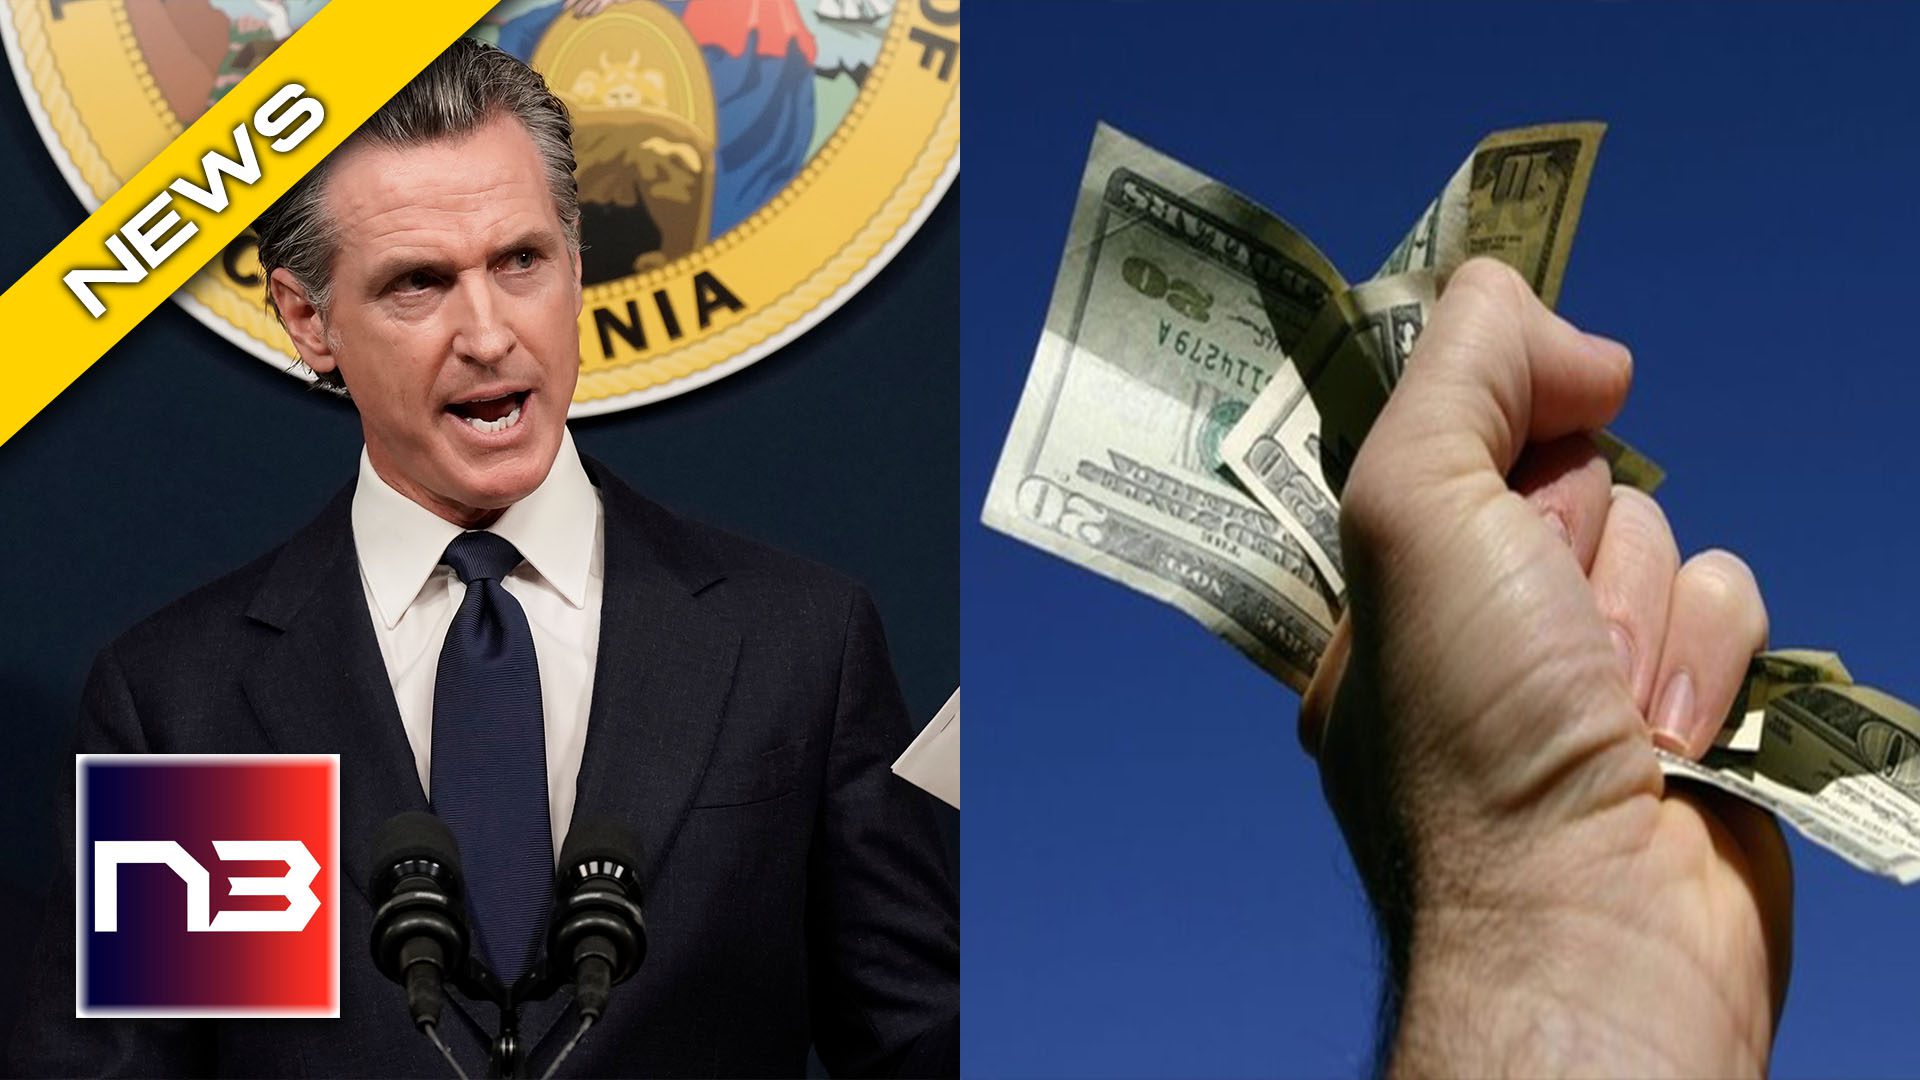 Newsom's Latest Scam Will Drive EVEN More Businesses From His Failing State